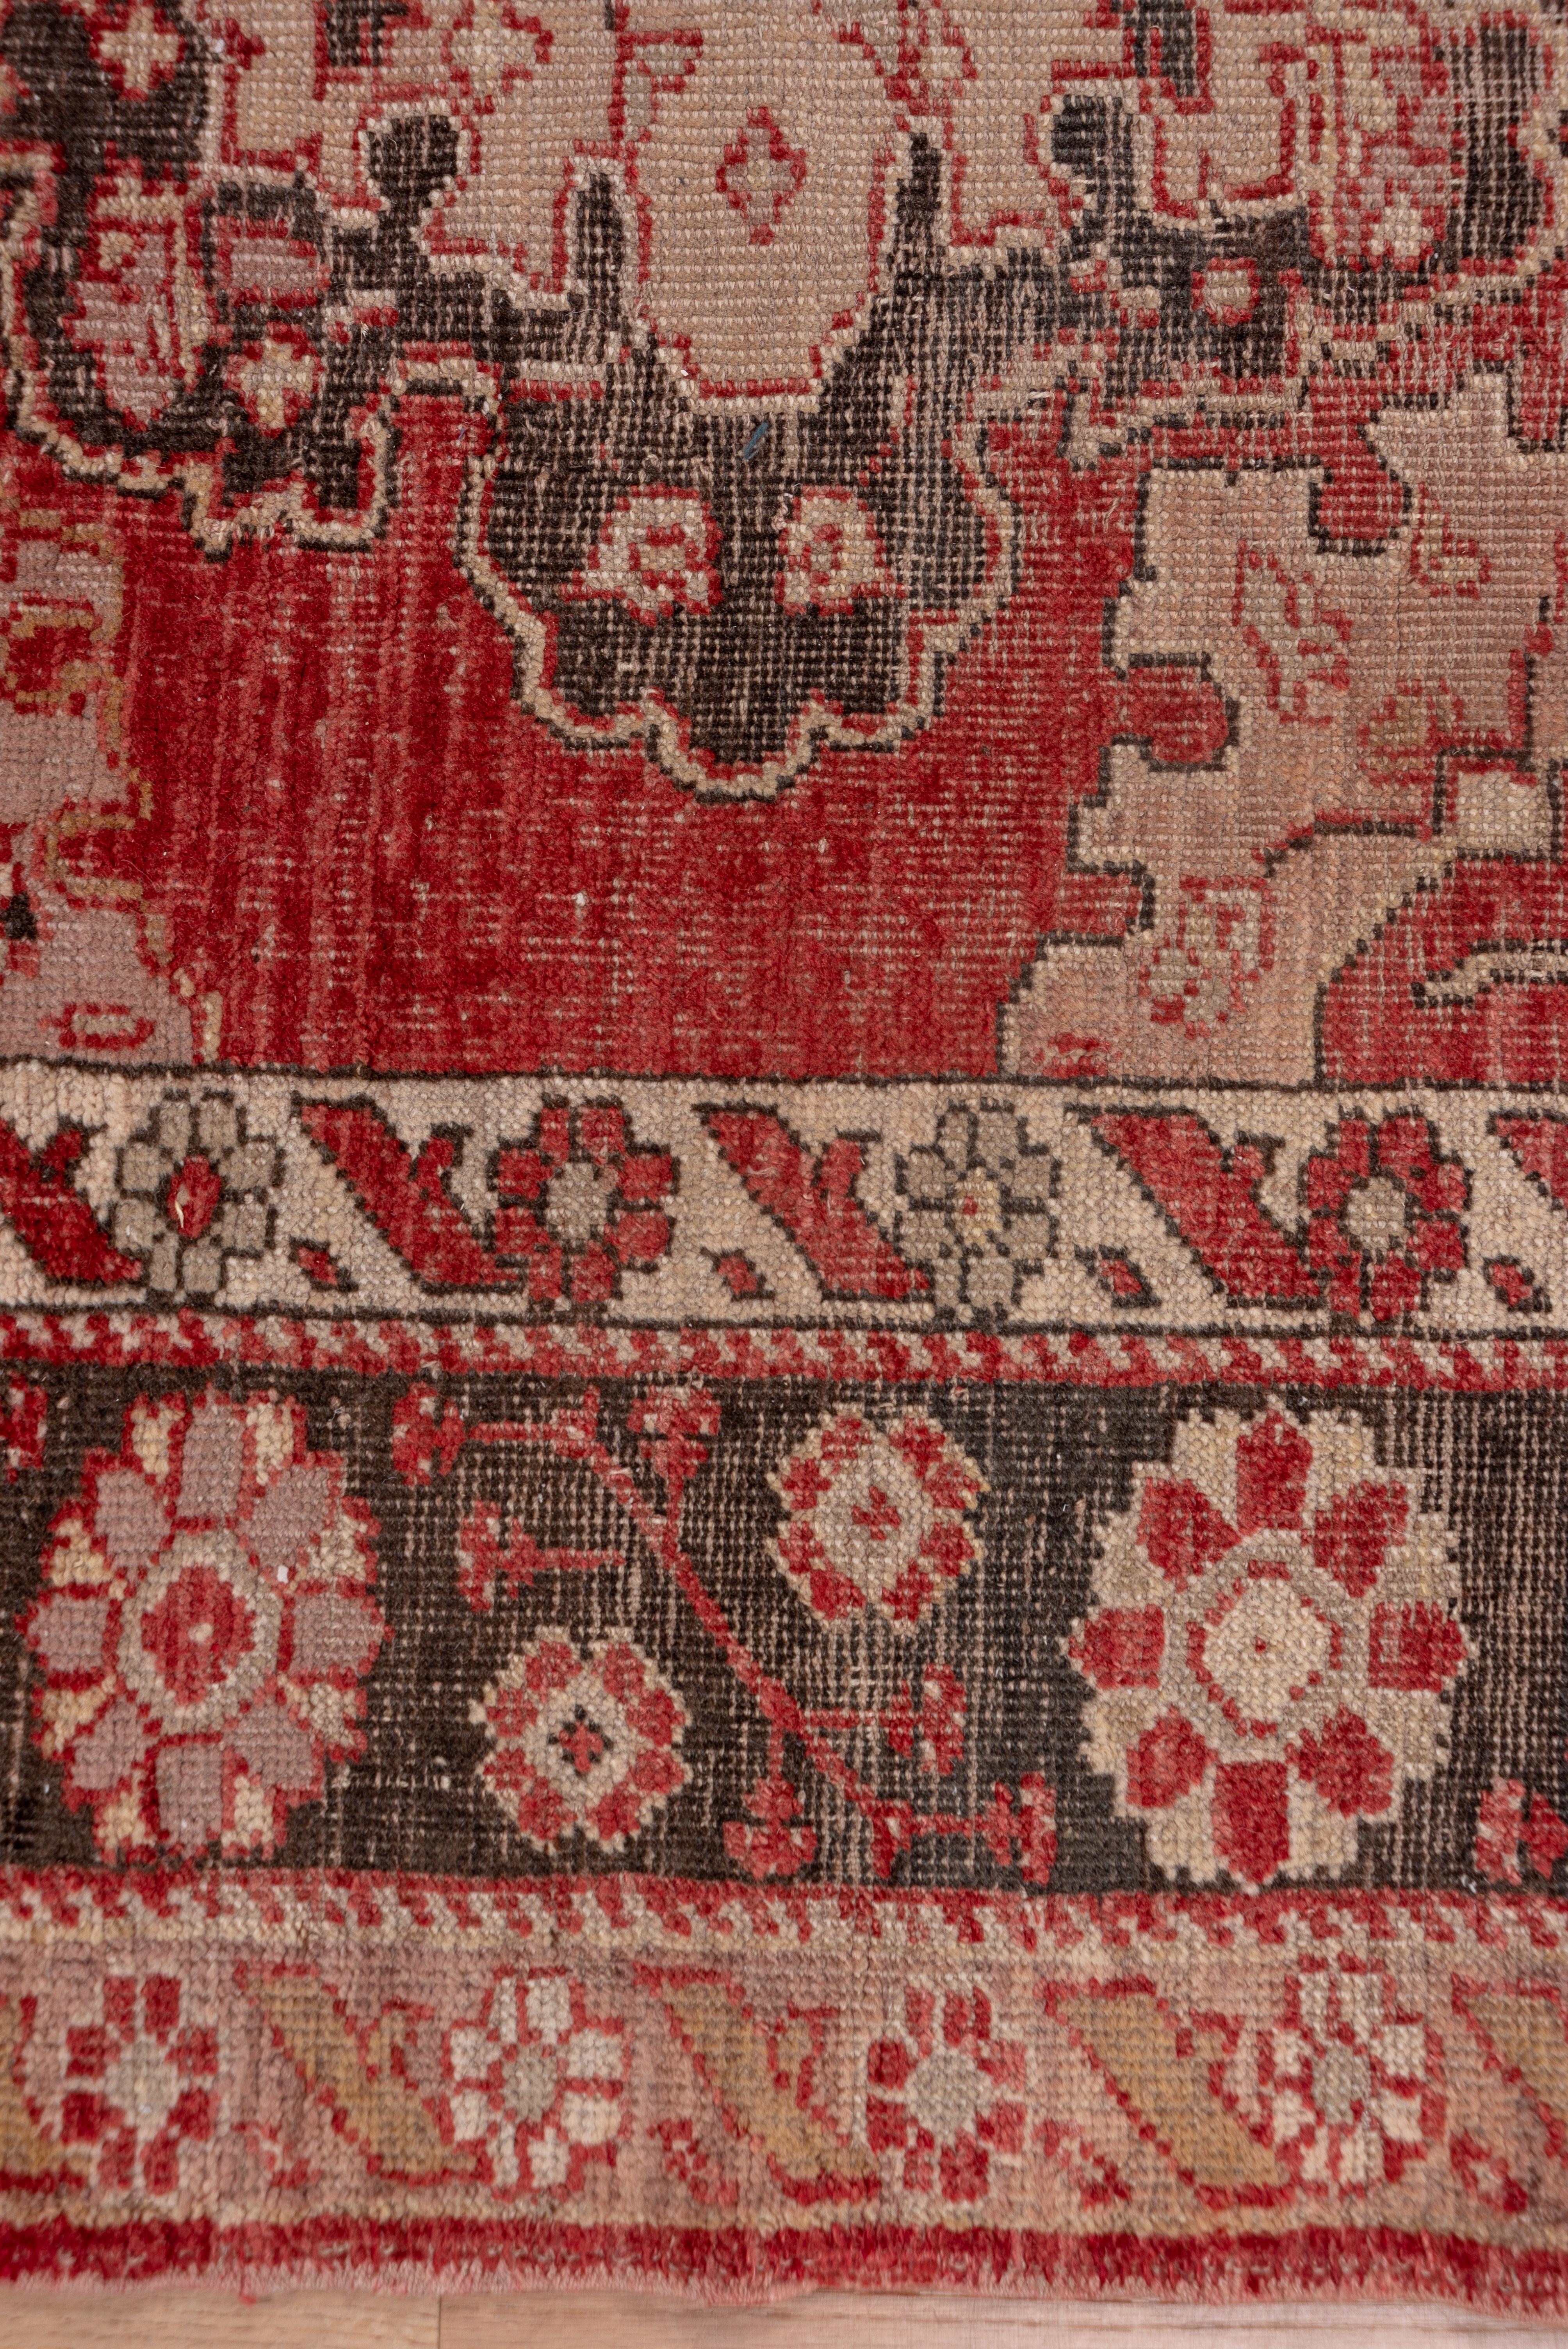 This wide west Anatolian runner displays ten scalloped octofoil medallions in pale green, dark brown and beige on a rather worn abrashed red ground with half side medallions and a strongly abrashed main border with rosettes and hyacinth sprays an